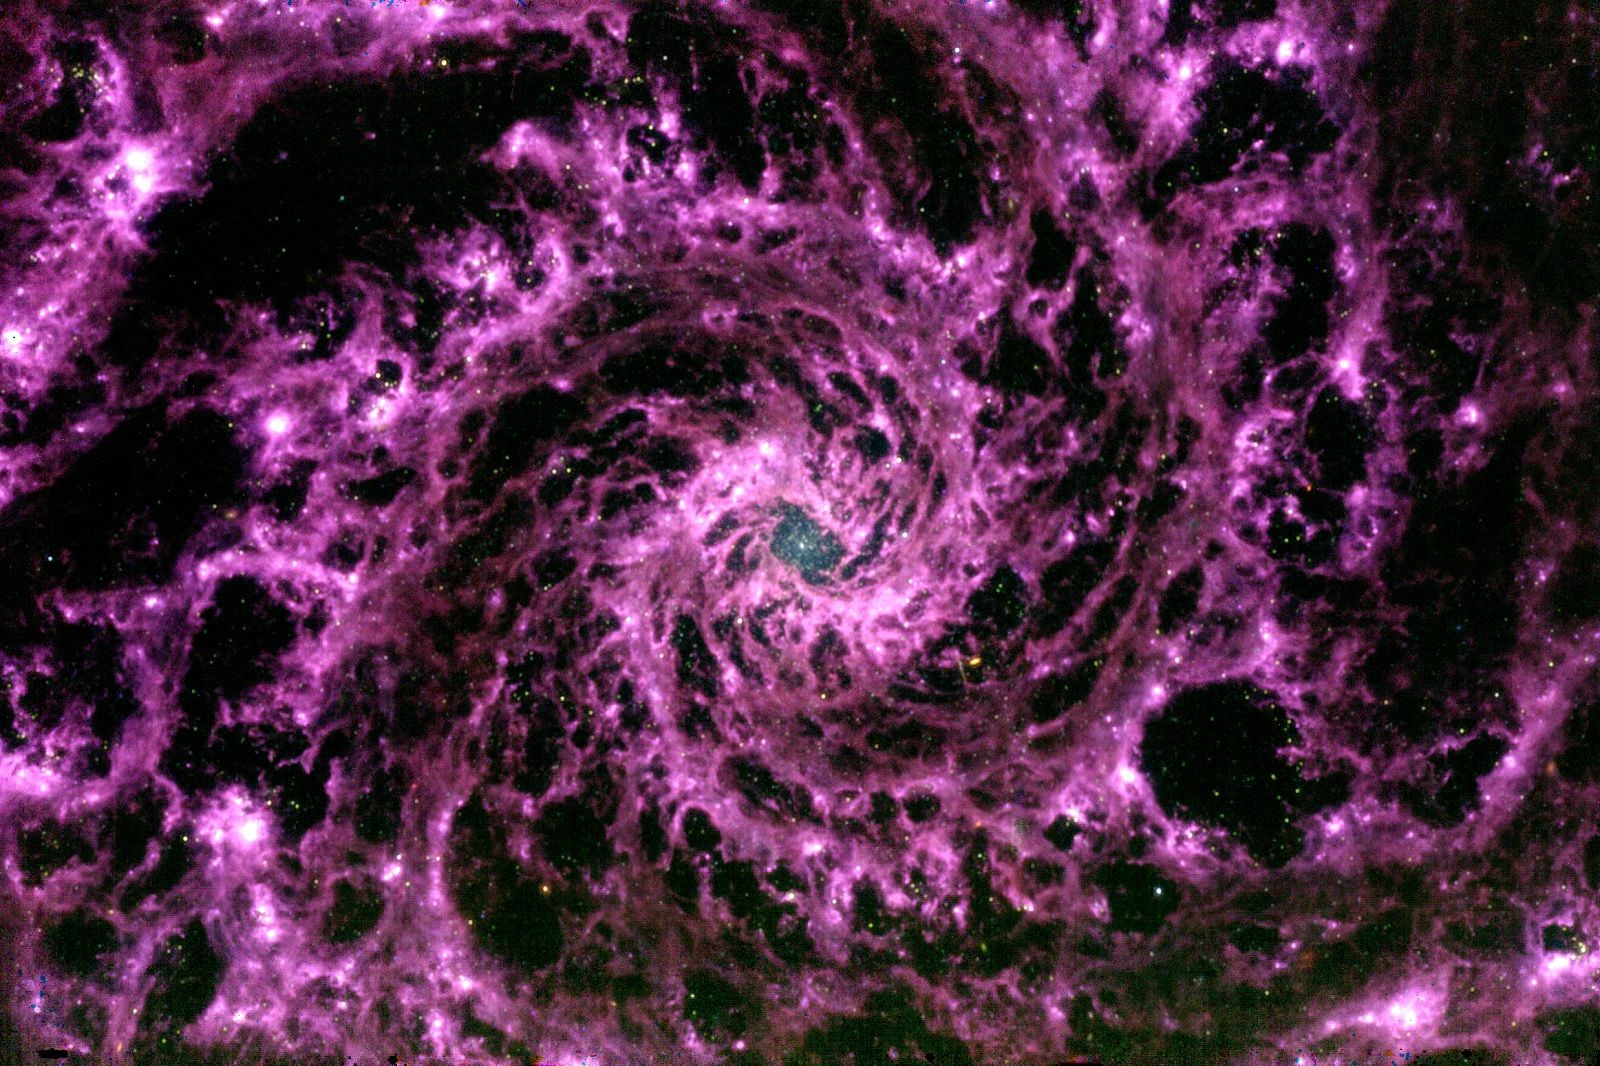 Amazing views of the Universe capture by the James Webb Space Telescope photo 10